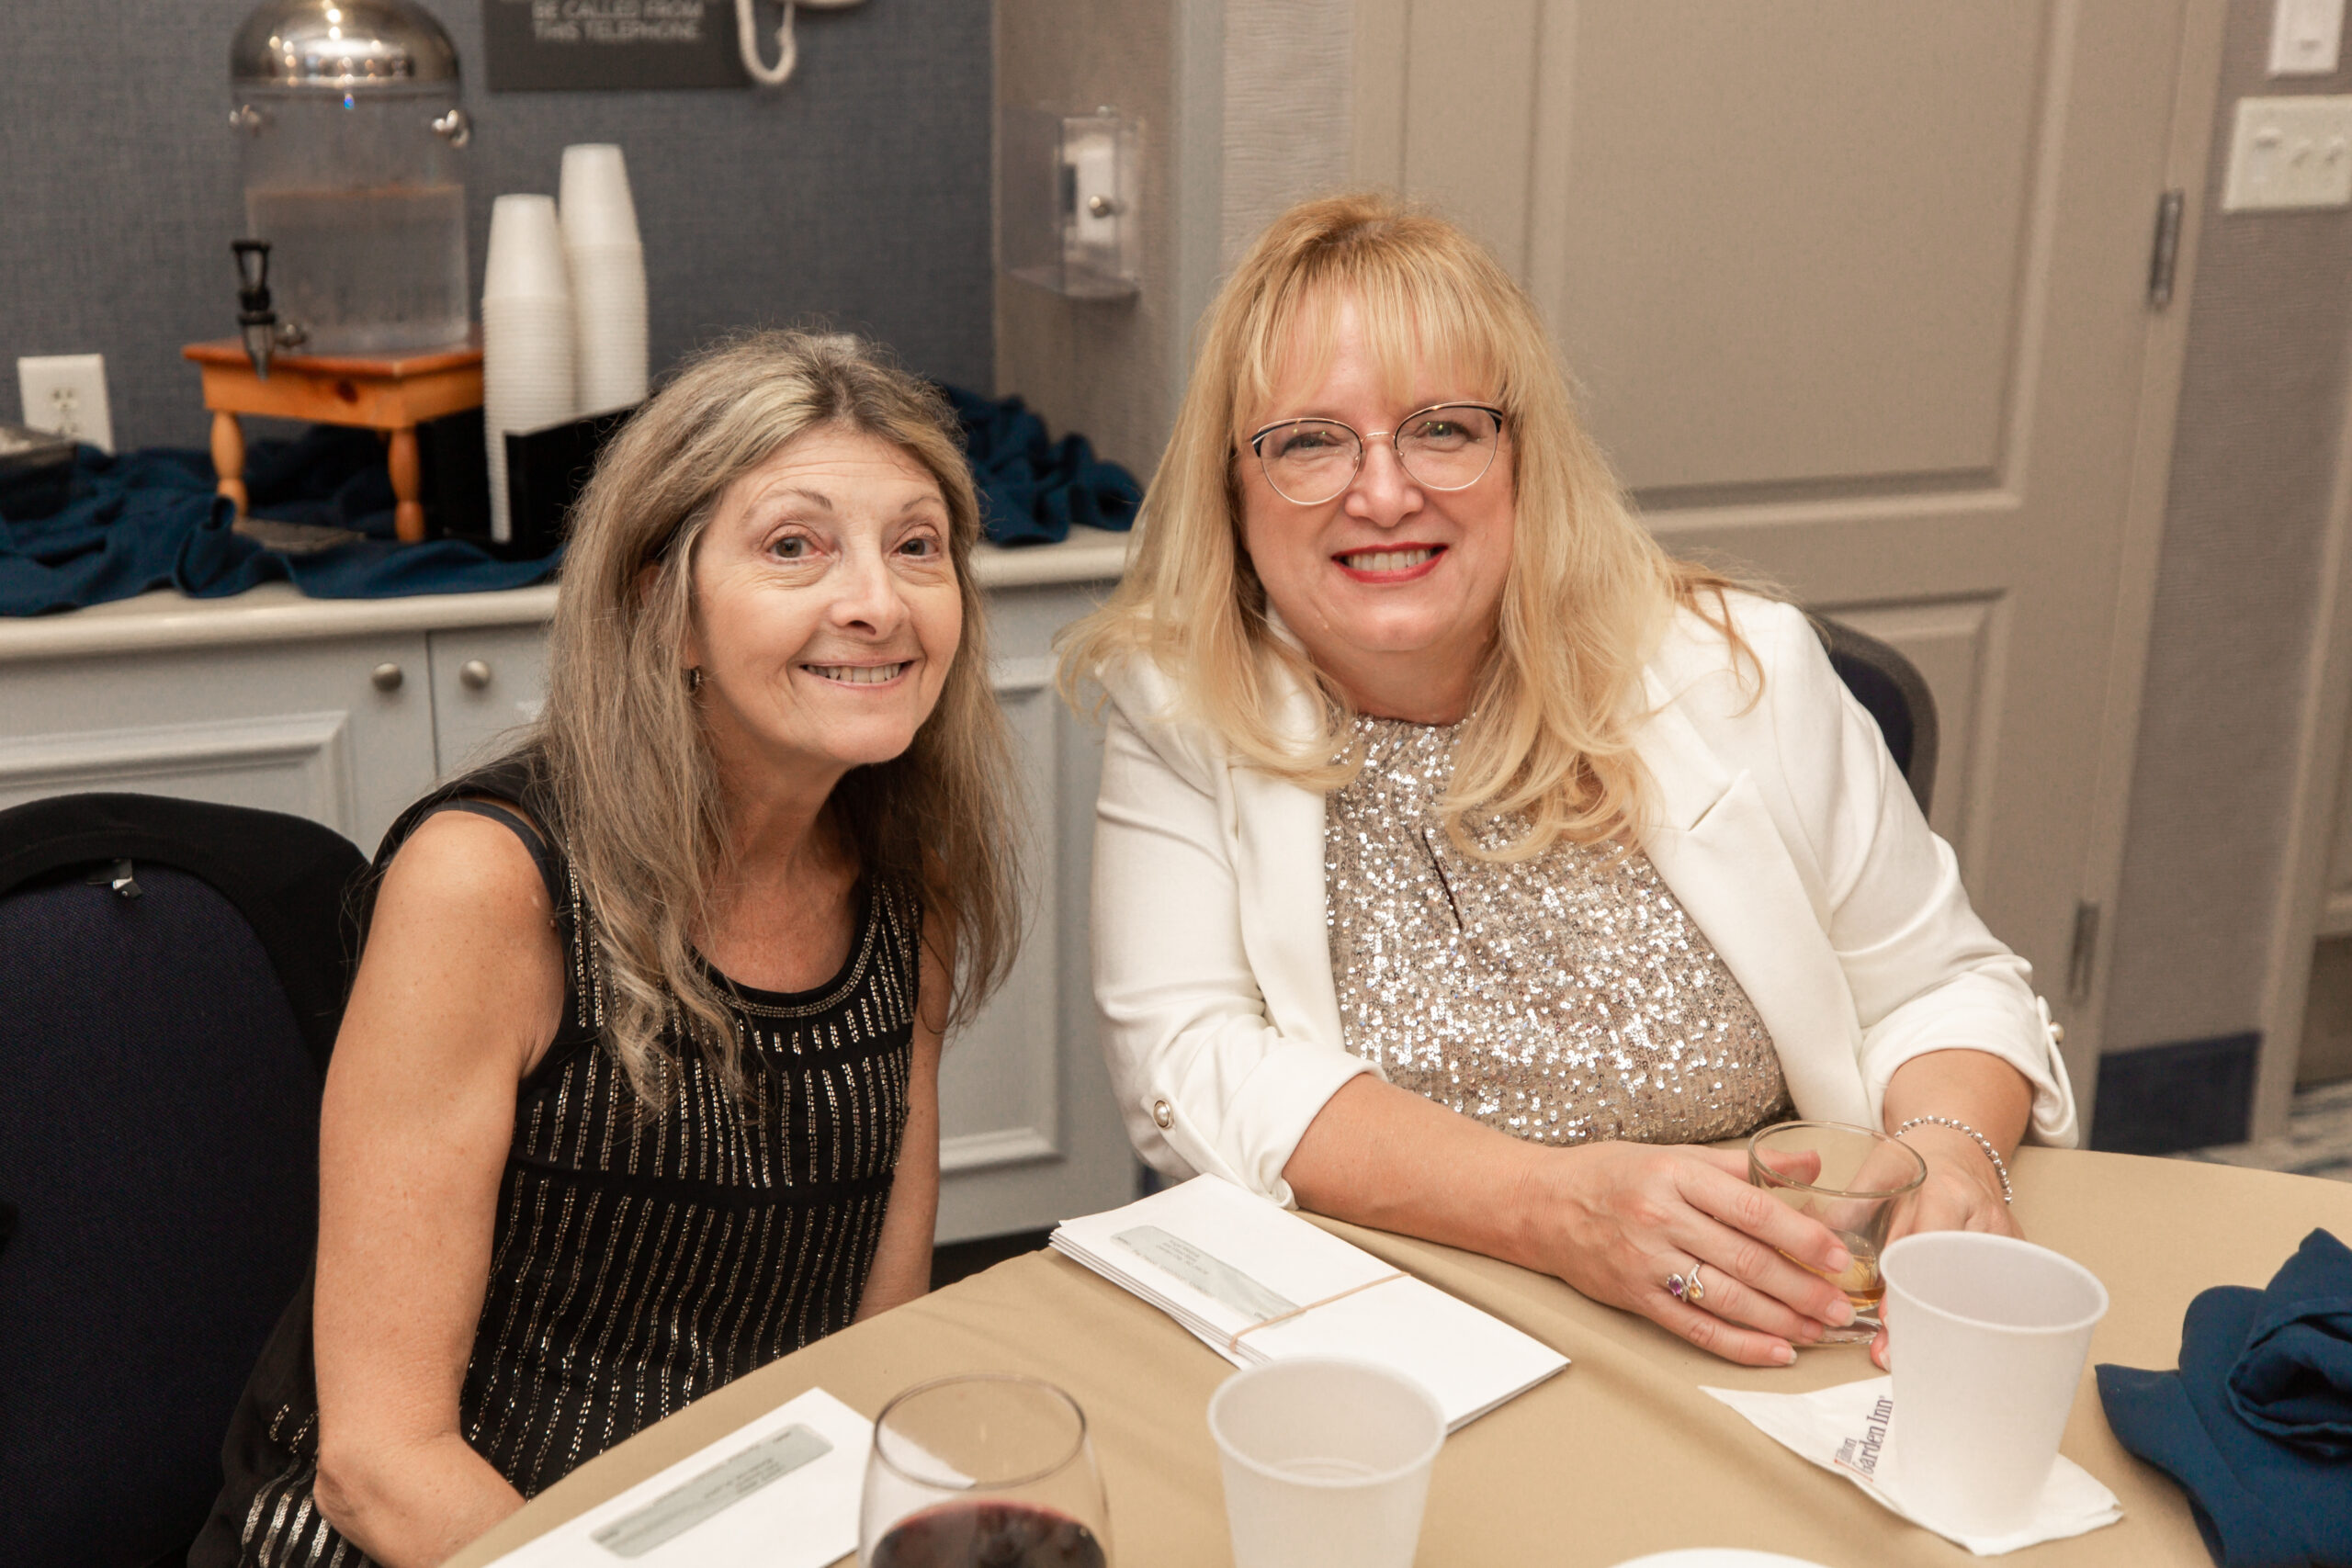 Accounting Team, Lynne Jessup and Lisa Bradford enjoying themselves at the Office Christmas party